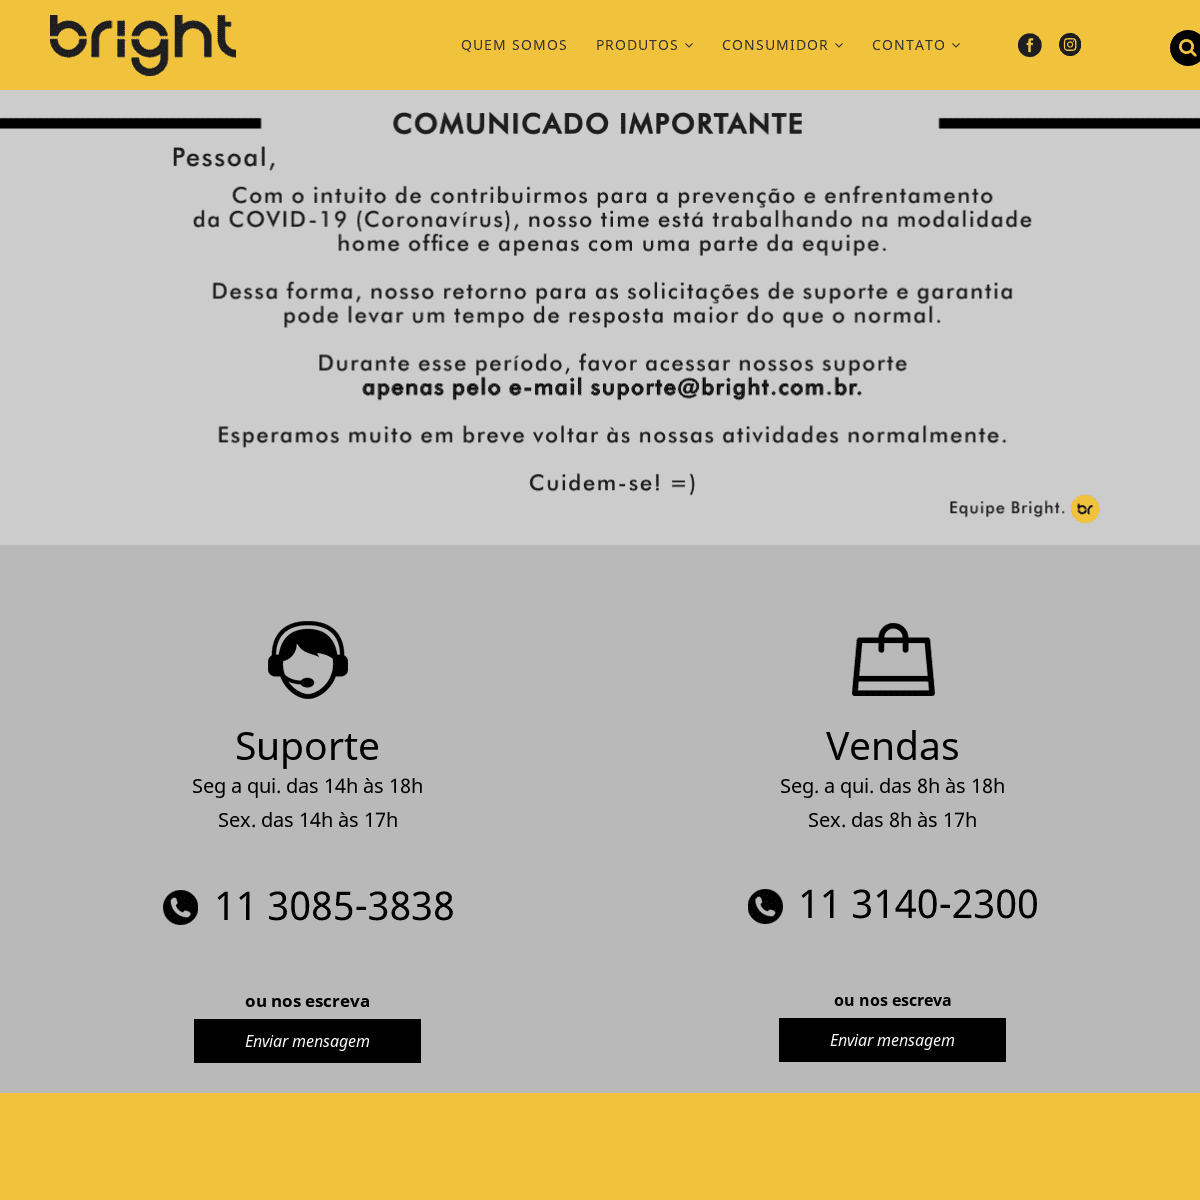 A complete backup of bright.com.br